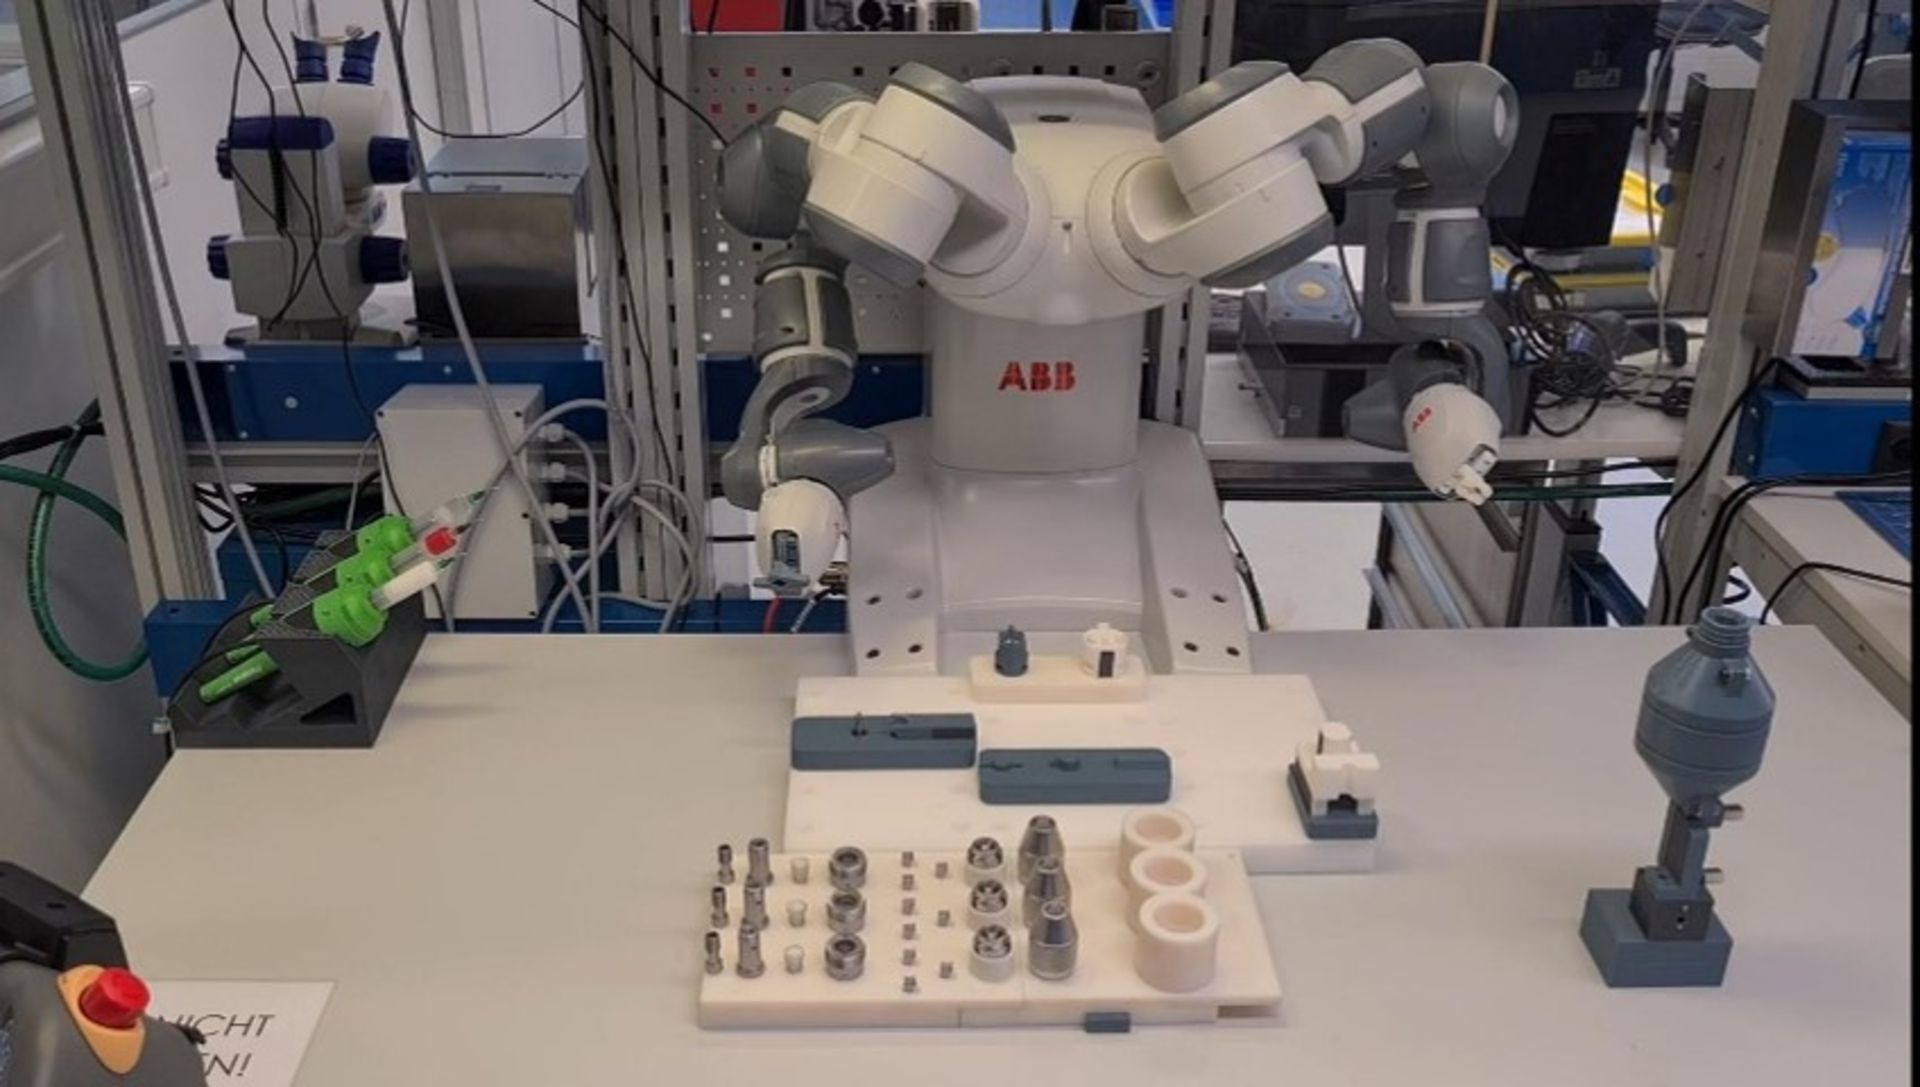 ABB IRB 14000 + PL-D Box YuMi -Dual Arm Robot (2021) Never Used in Production